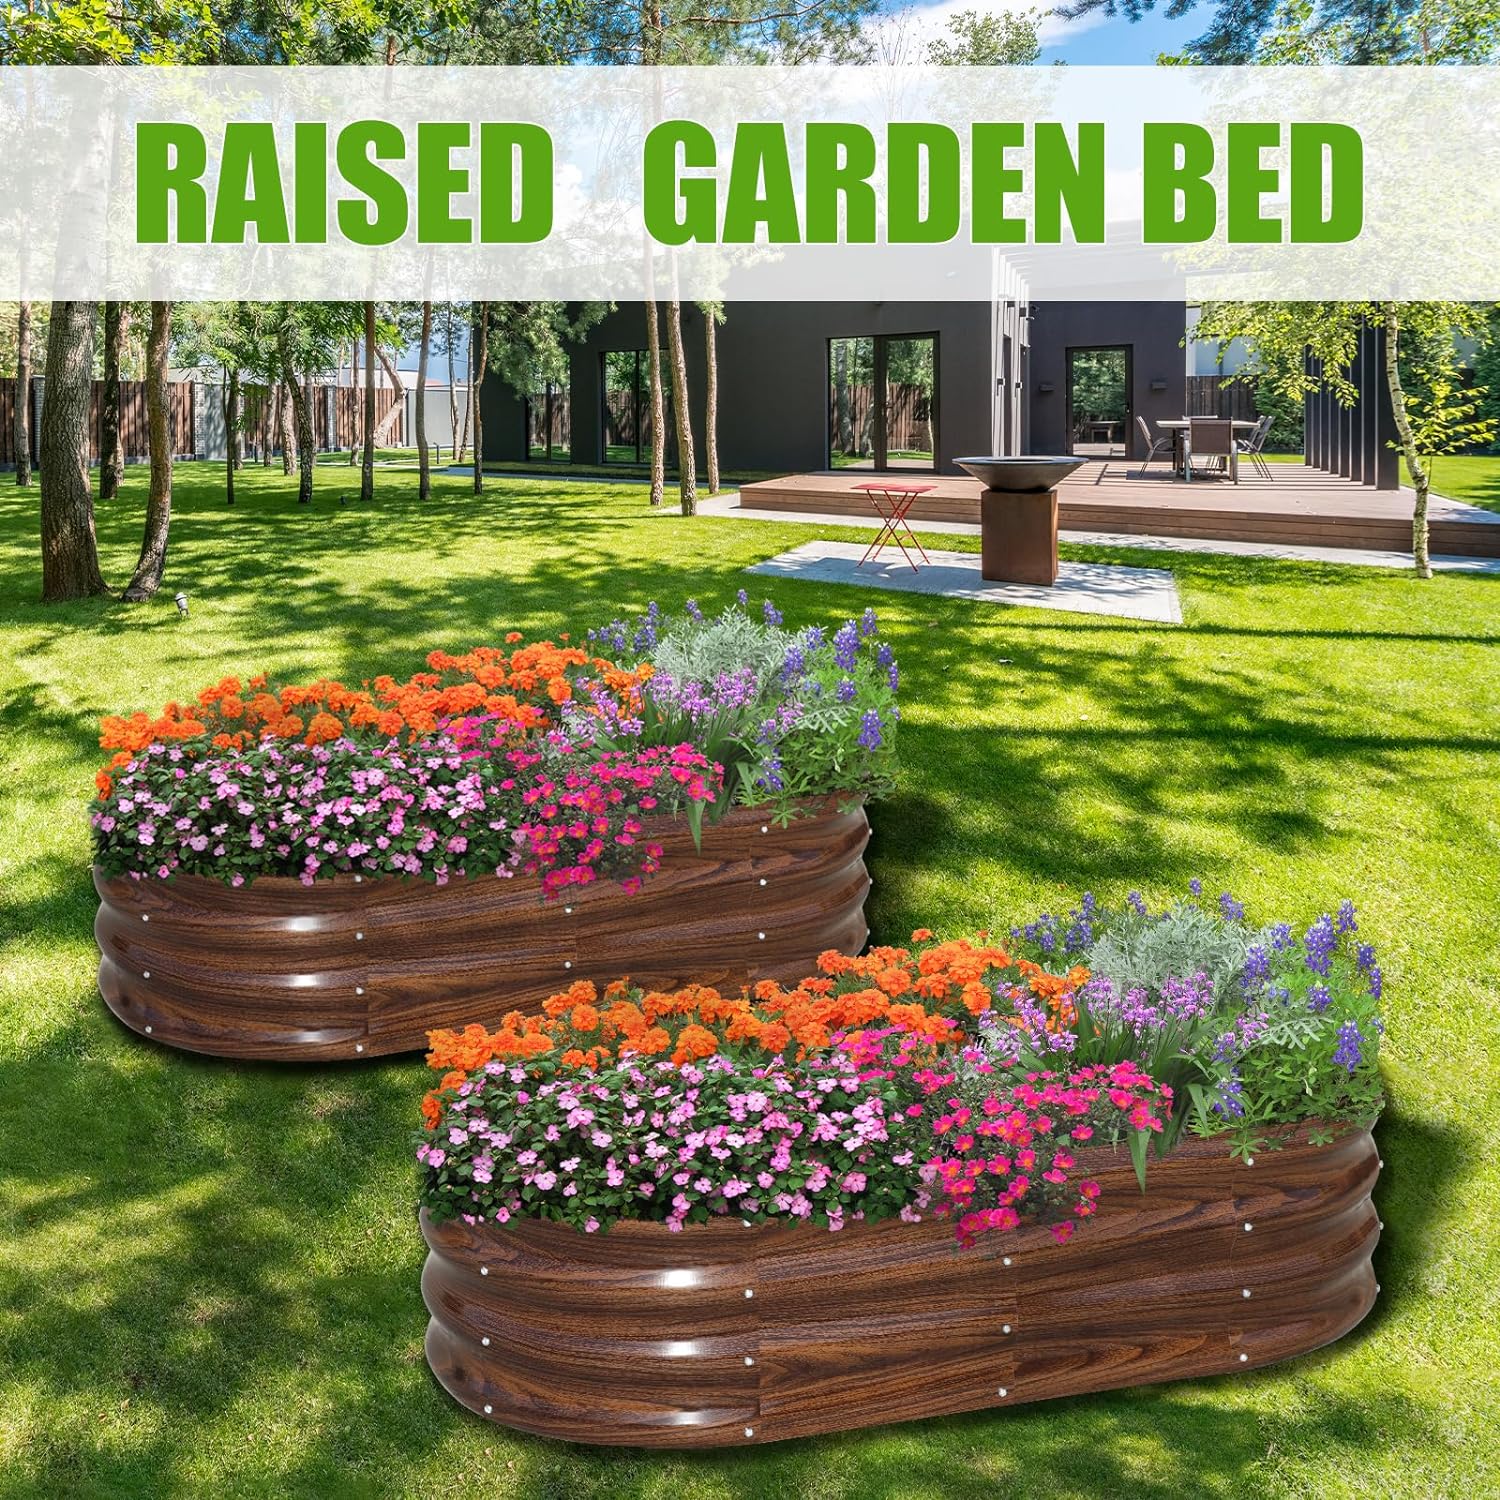 Galvanized Raised Garden Bed Outdoor, 2 Pcs 4x2x1ft Oval Metal Planter Box for Planting Plants Vegetables, Brown Massage Lab